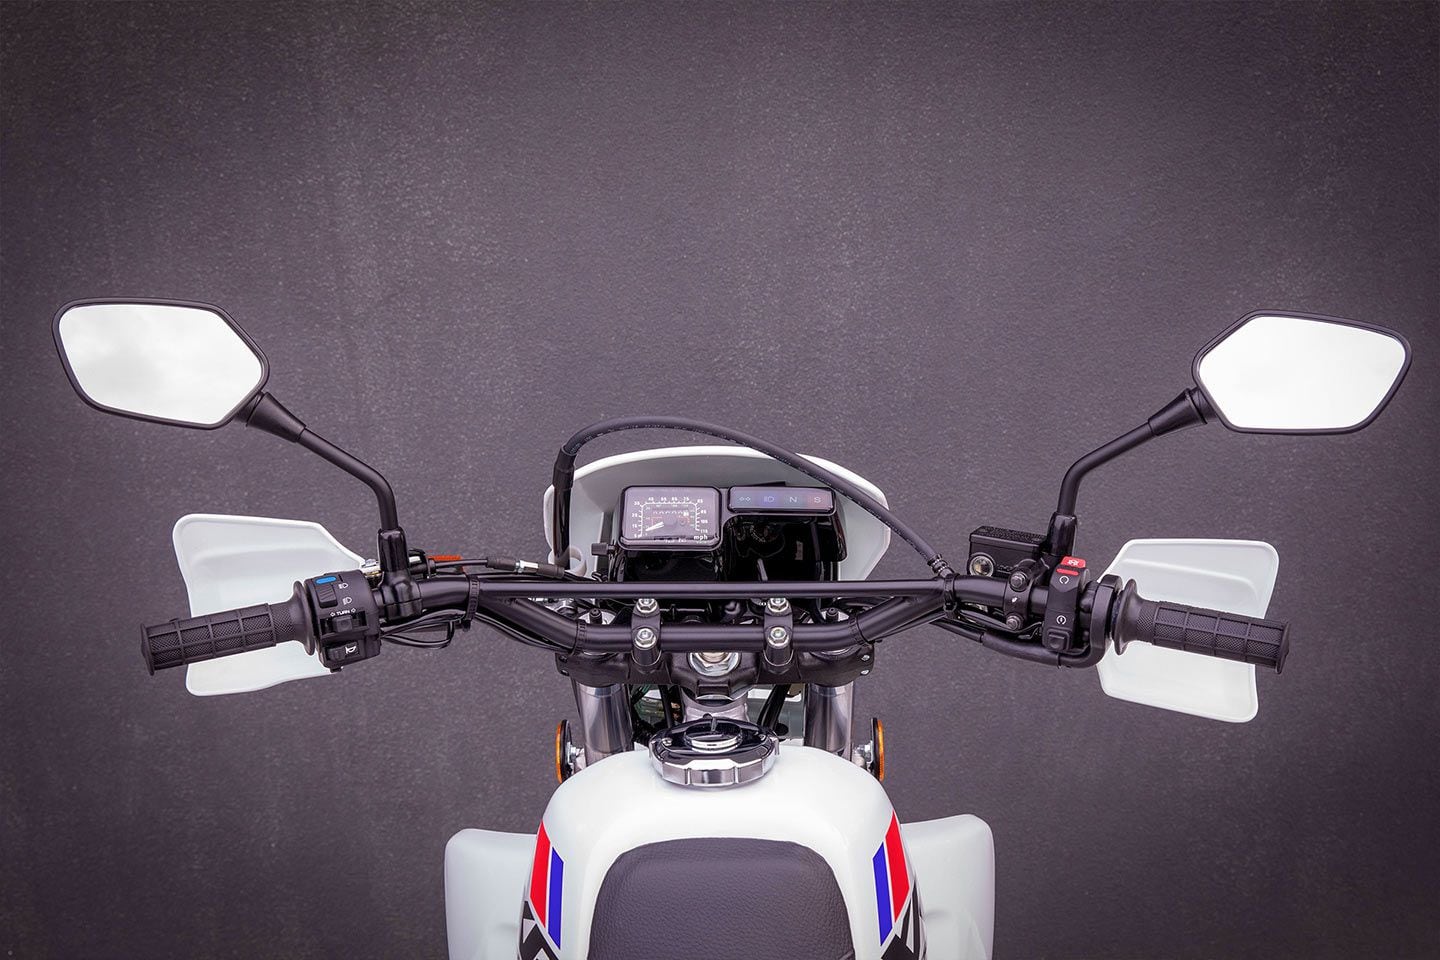 The bare-bones cockpit has nothing superfluous. The speedometer goes to 115 mph. The motorcycle’s top speed is pretty close to that as well.